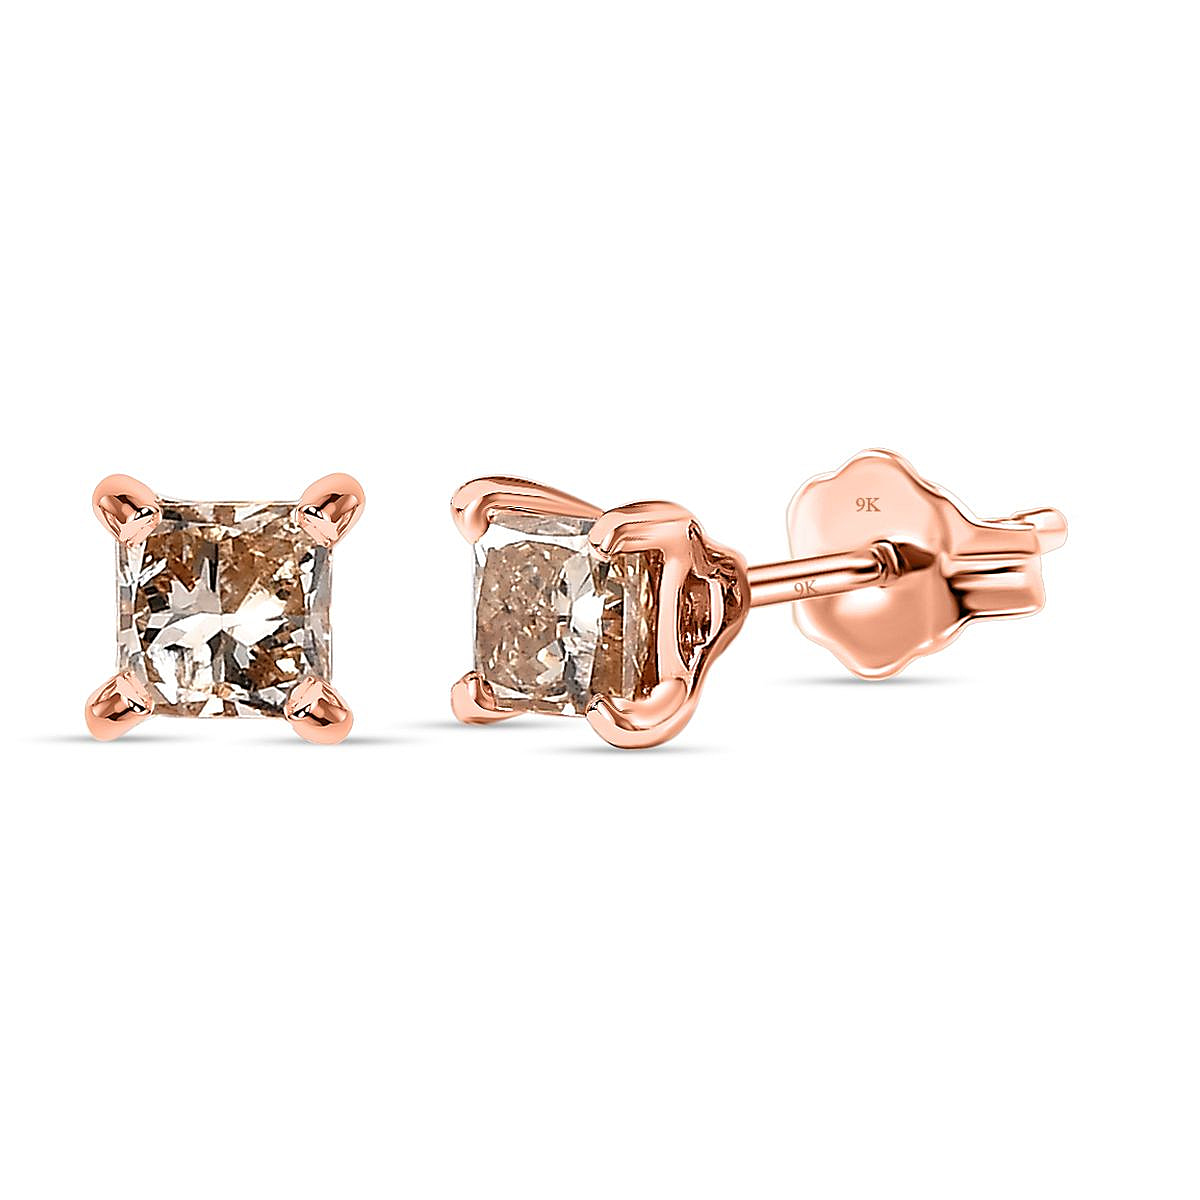 9K Rose Gold Solitaire Champagne Diamond Stud Earrings 0.25 Ct.